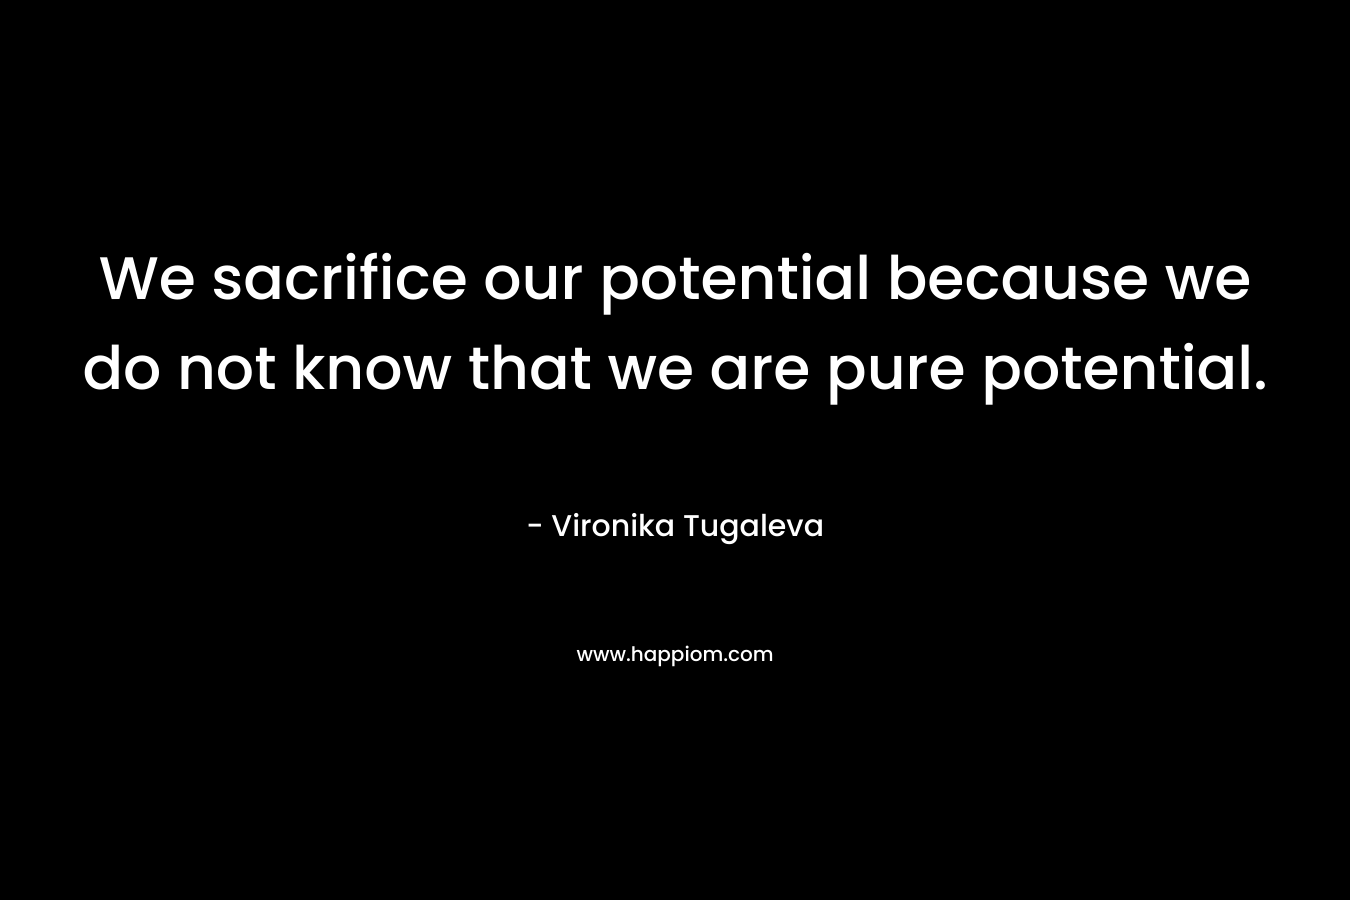 We sacrifice our potential because we do not know that we are pure potential. – Vironika Tugaleva